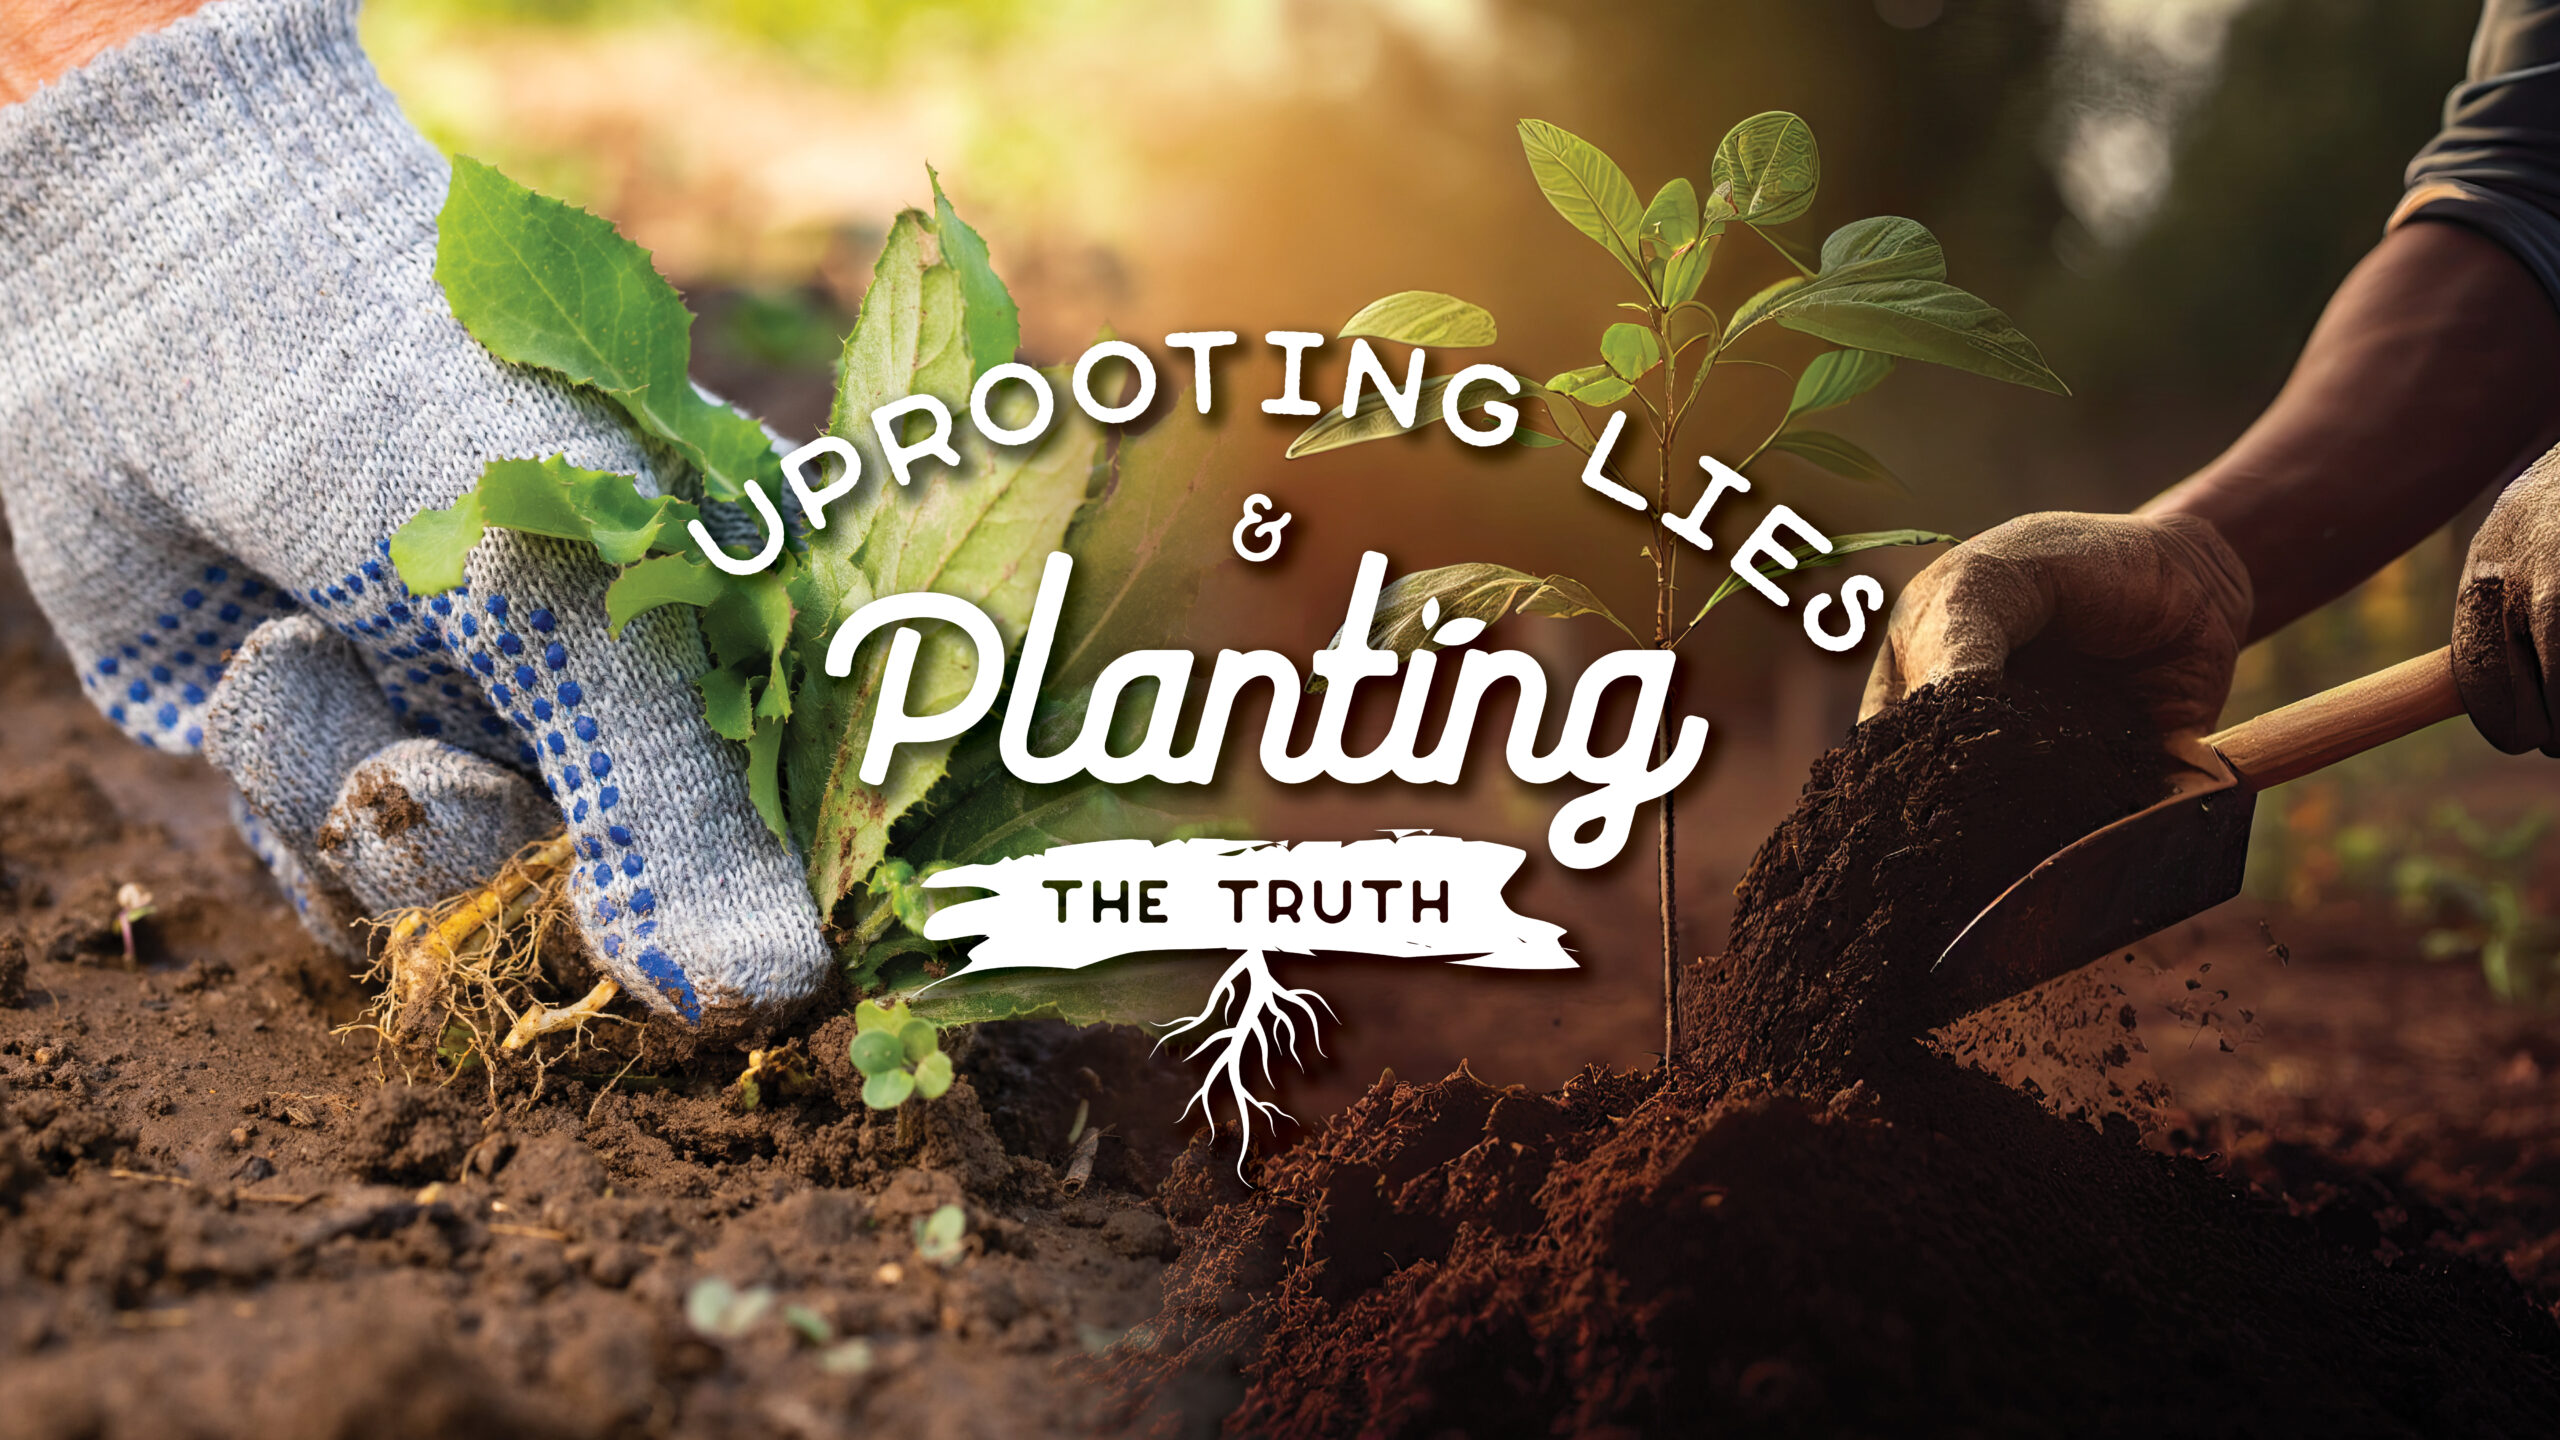 Uprooting Lies and Planting the Truth